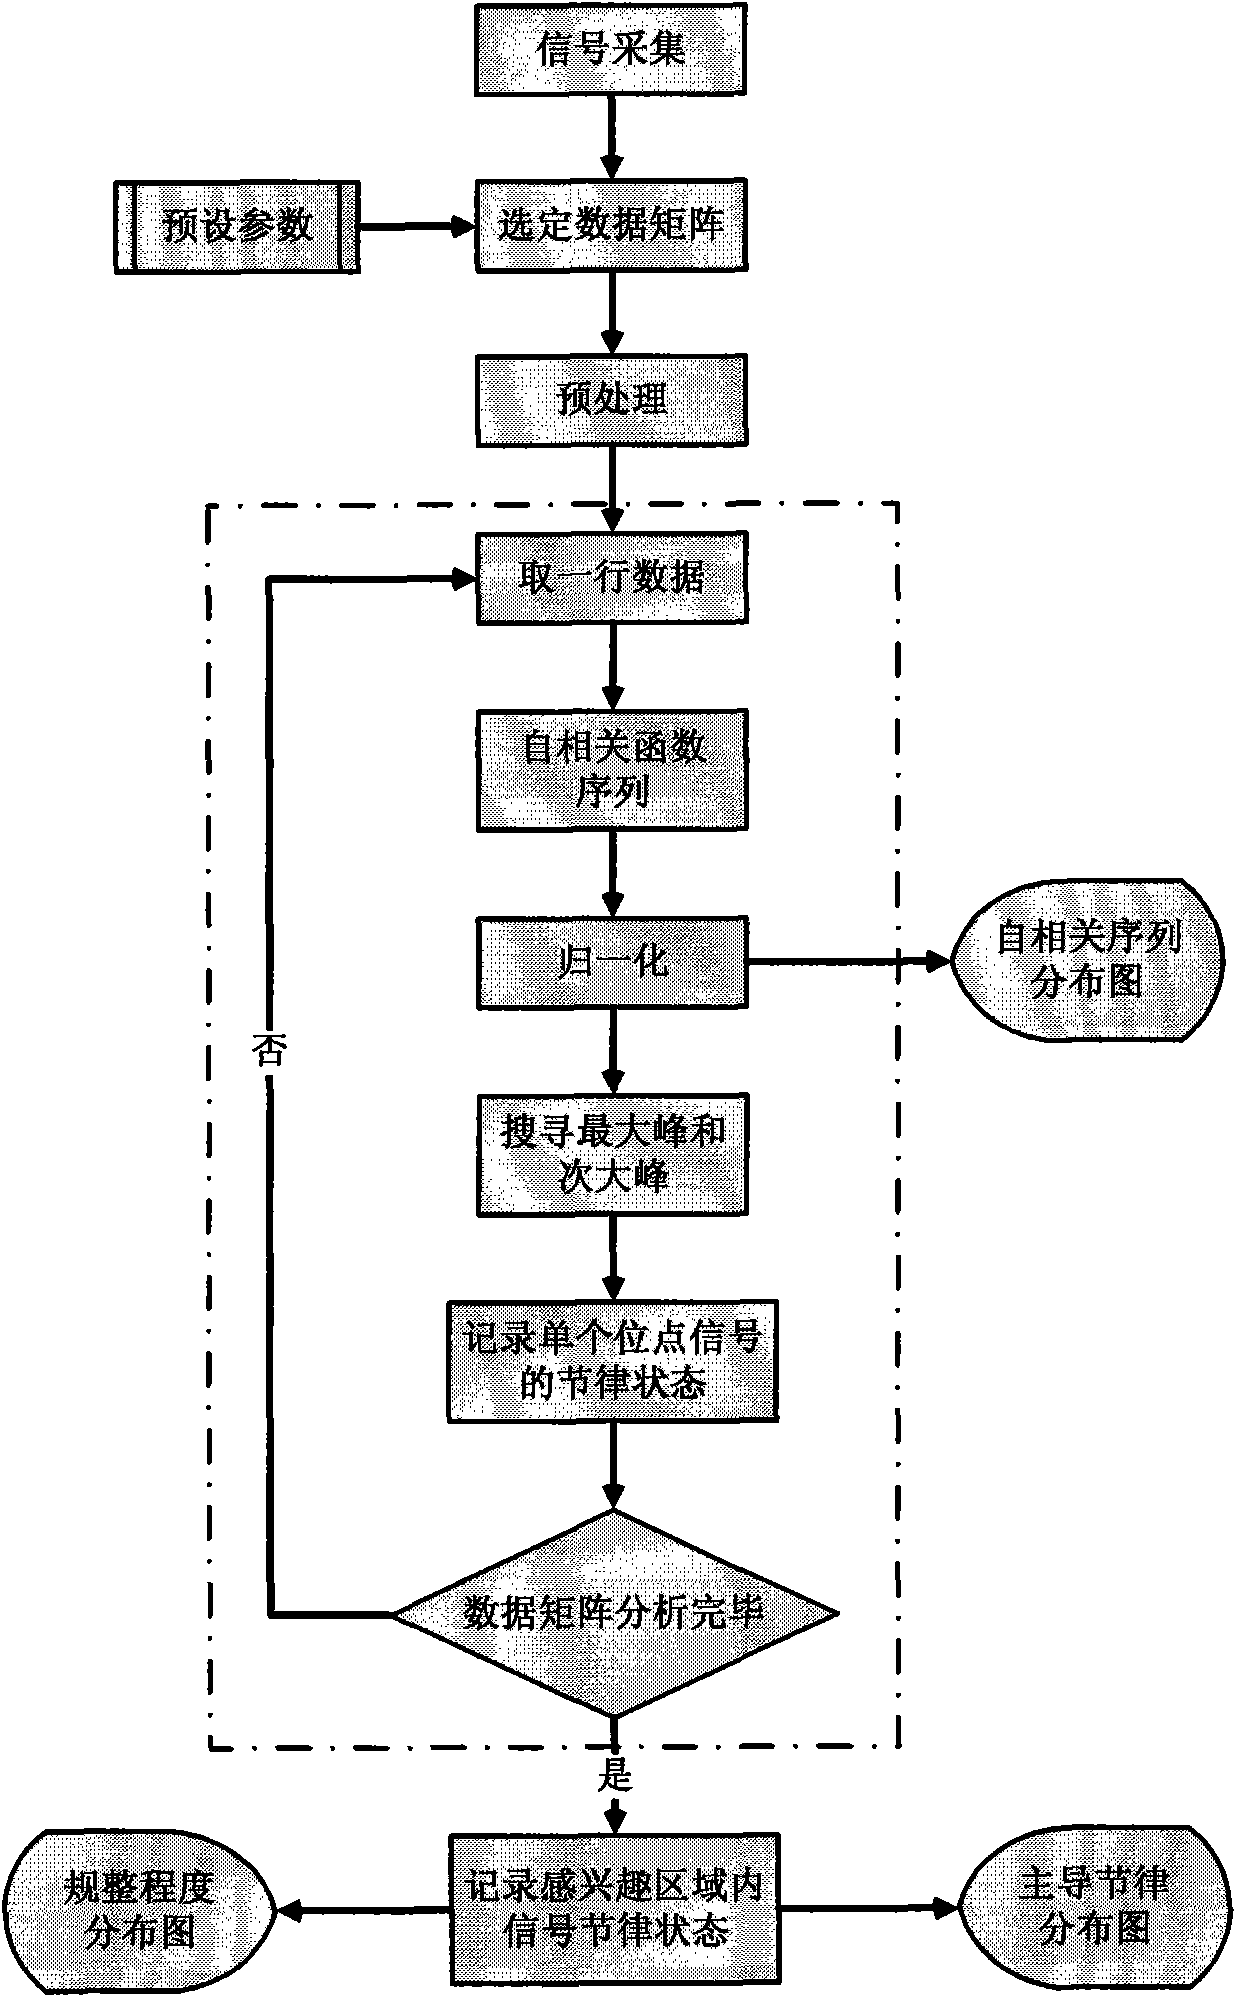 Cardiac mapping signal analyzing and processing device and method